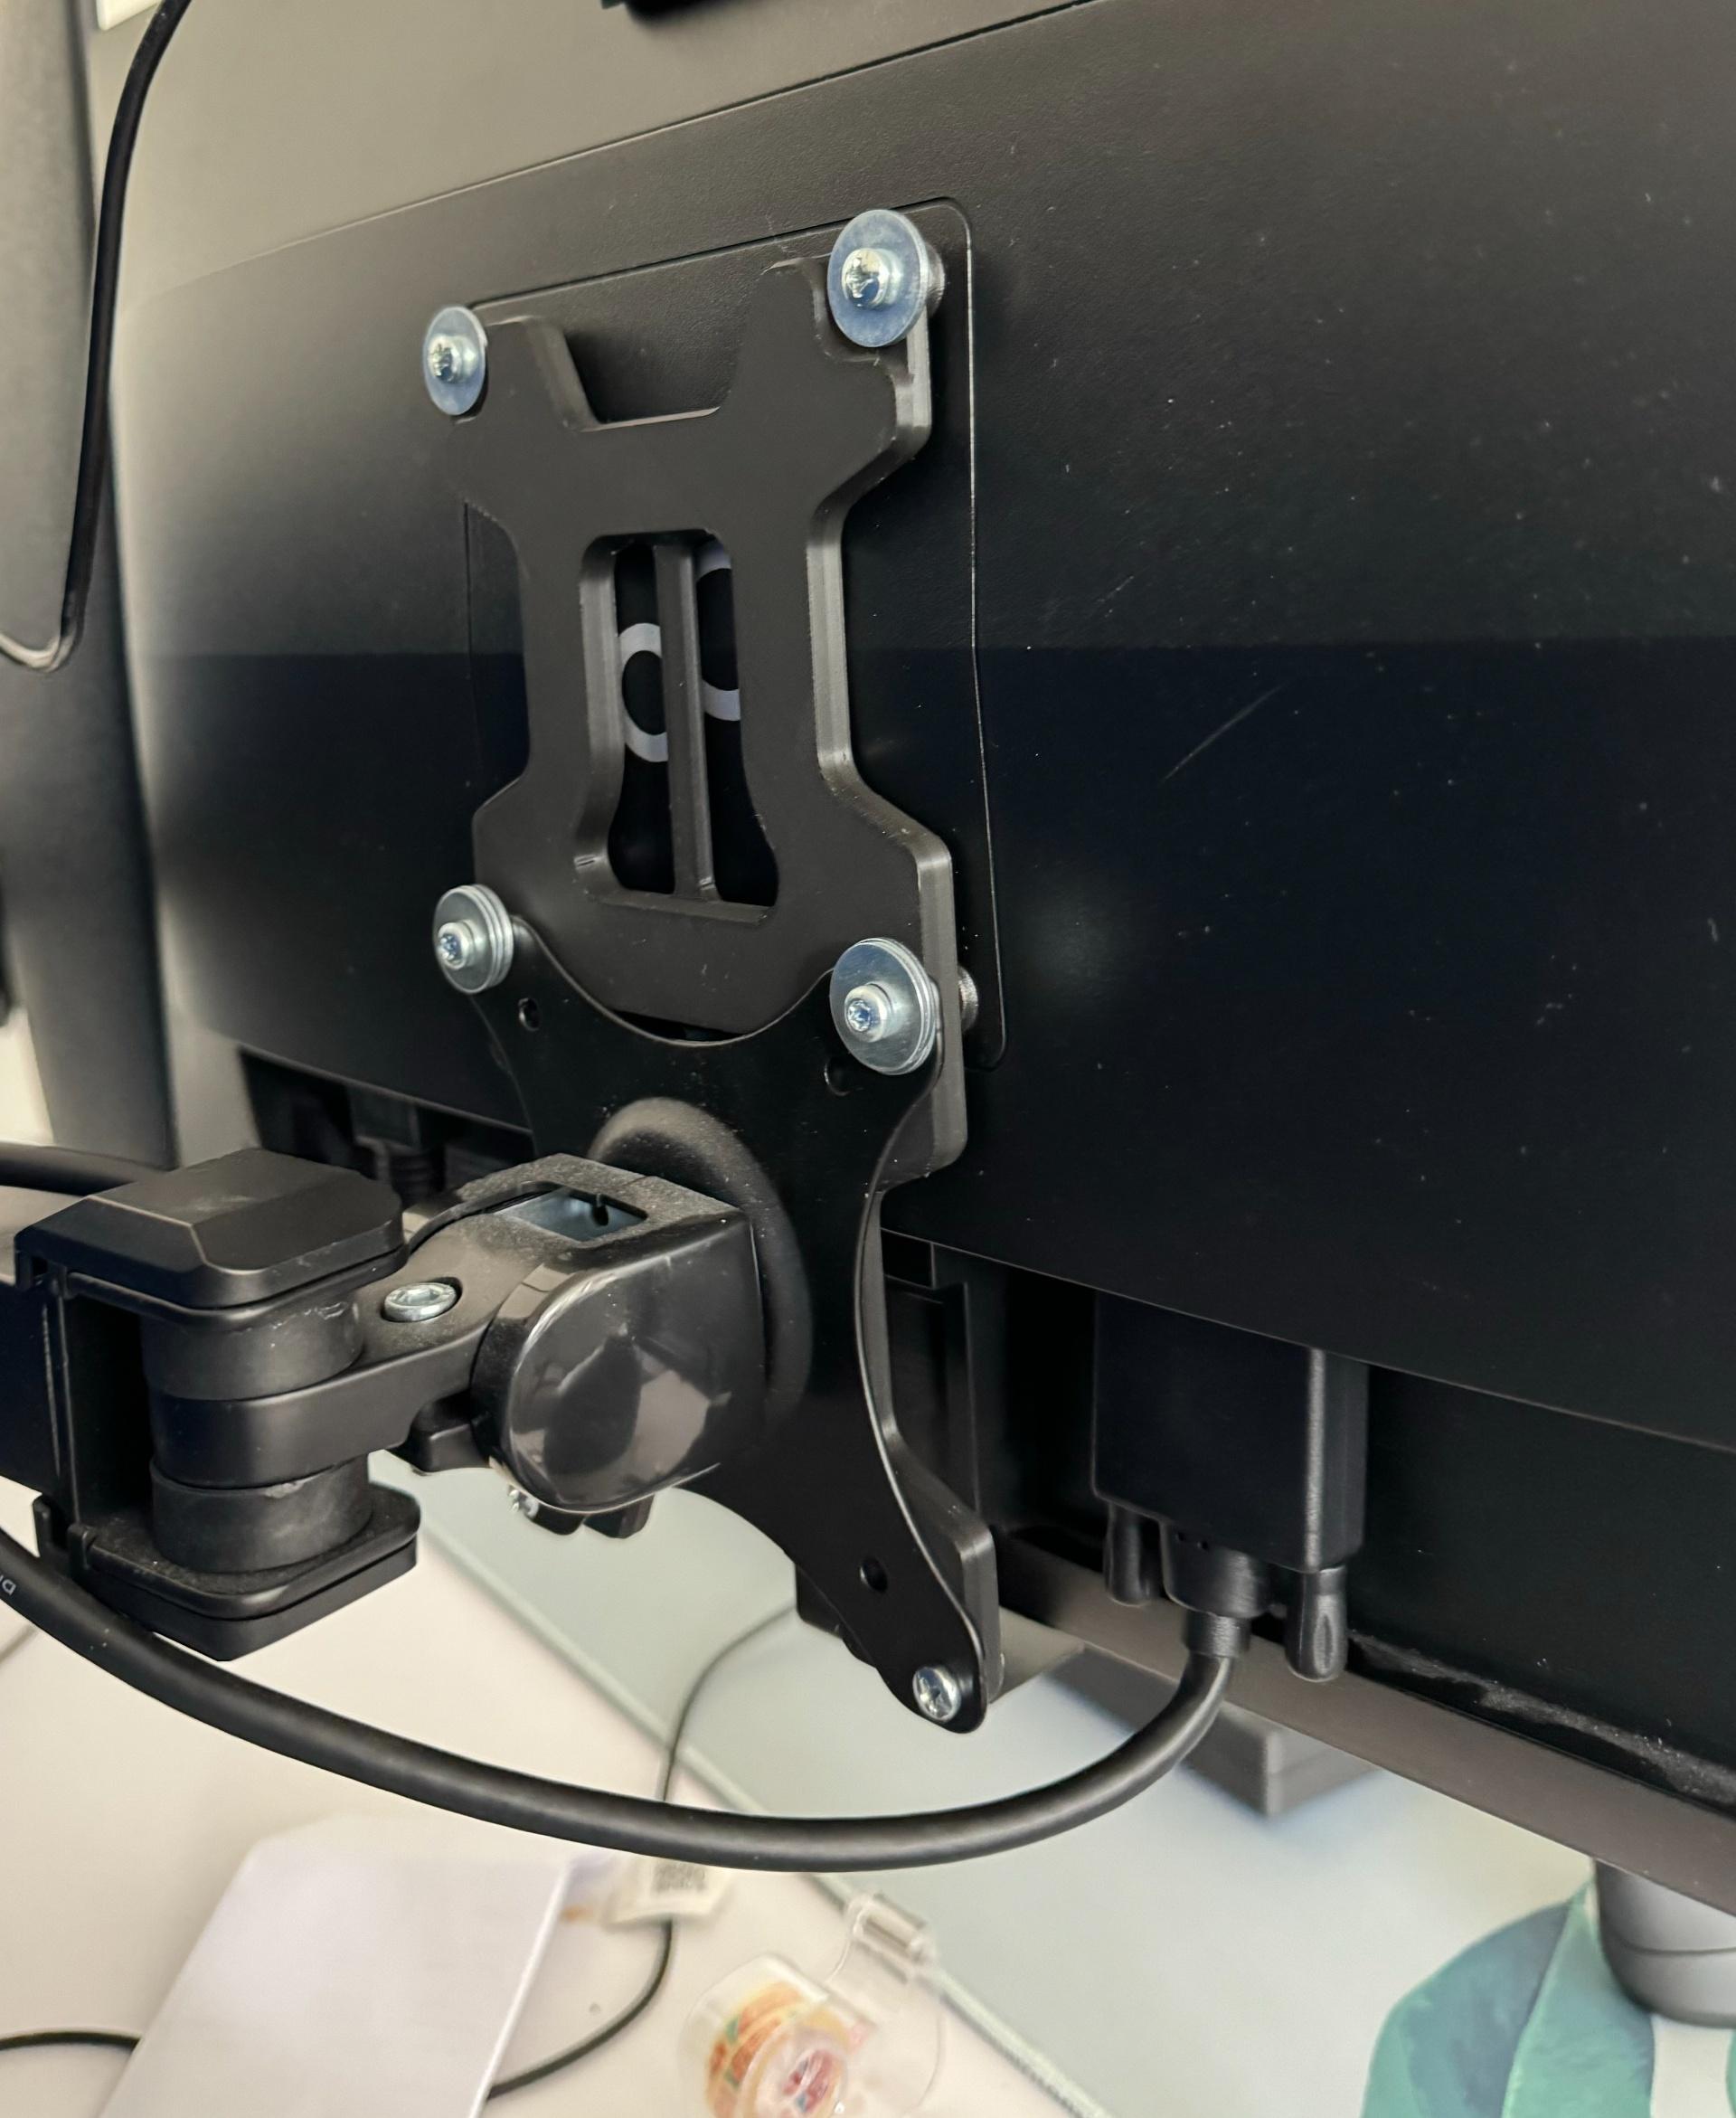 VESA 100mm Offset Mount - Monitor Arm Relocation - Works great! Even vertically. I thin it was meant to be used horizontally? This is a 24" monitor. - 3d model